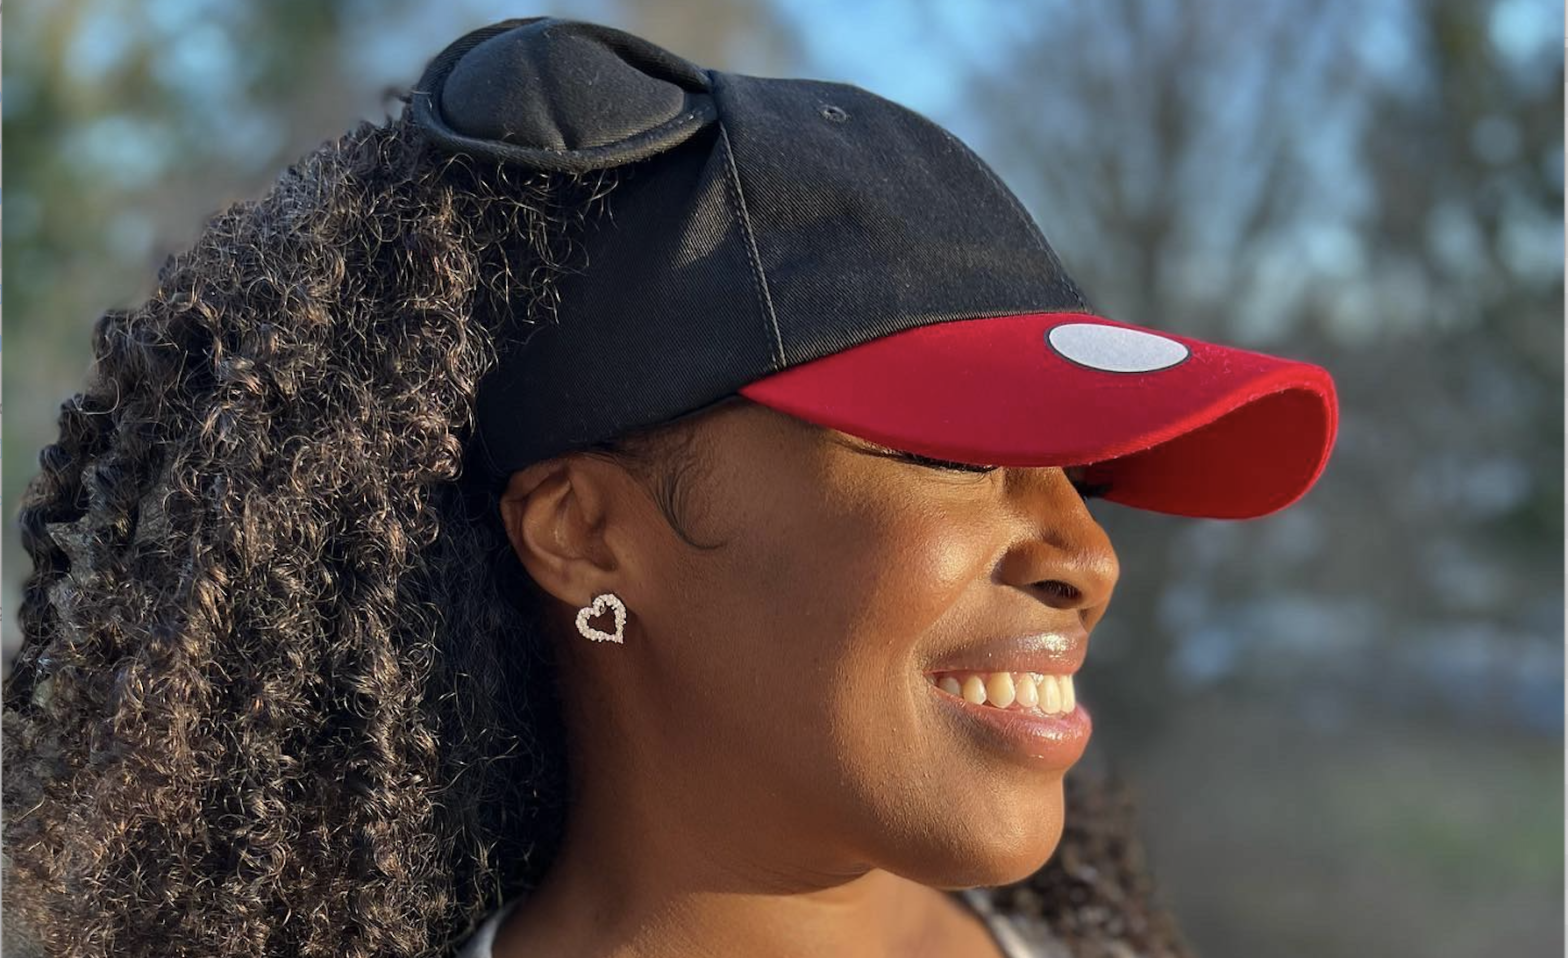 CurlCap Becomes First Black-Owned Apparel Company To Sell Original Authorized Disney Merchandise